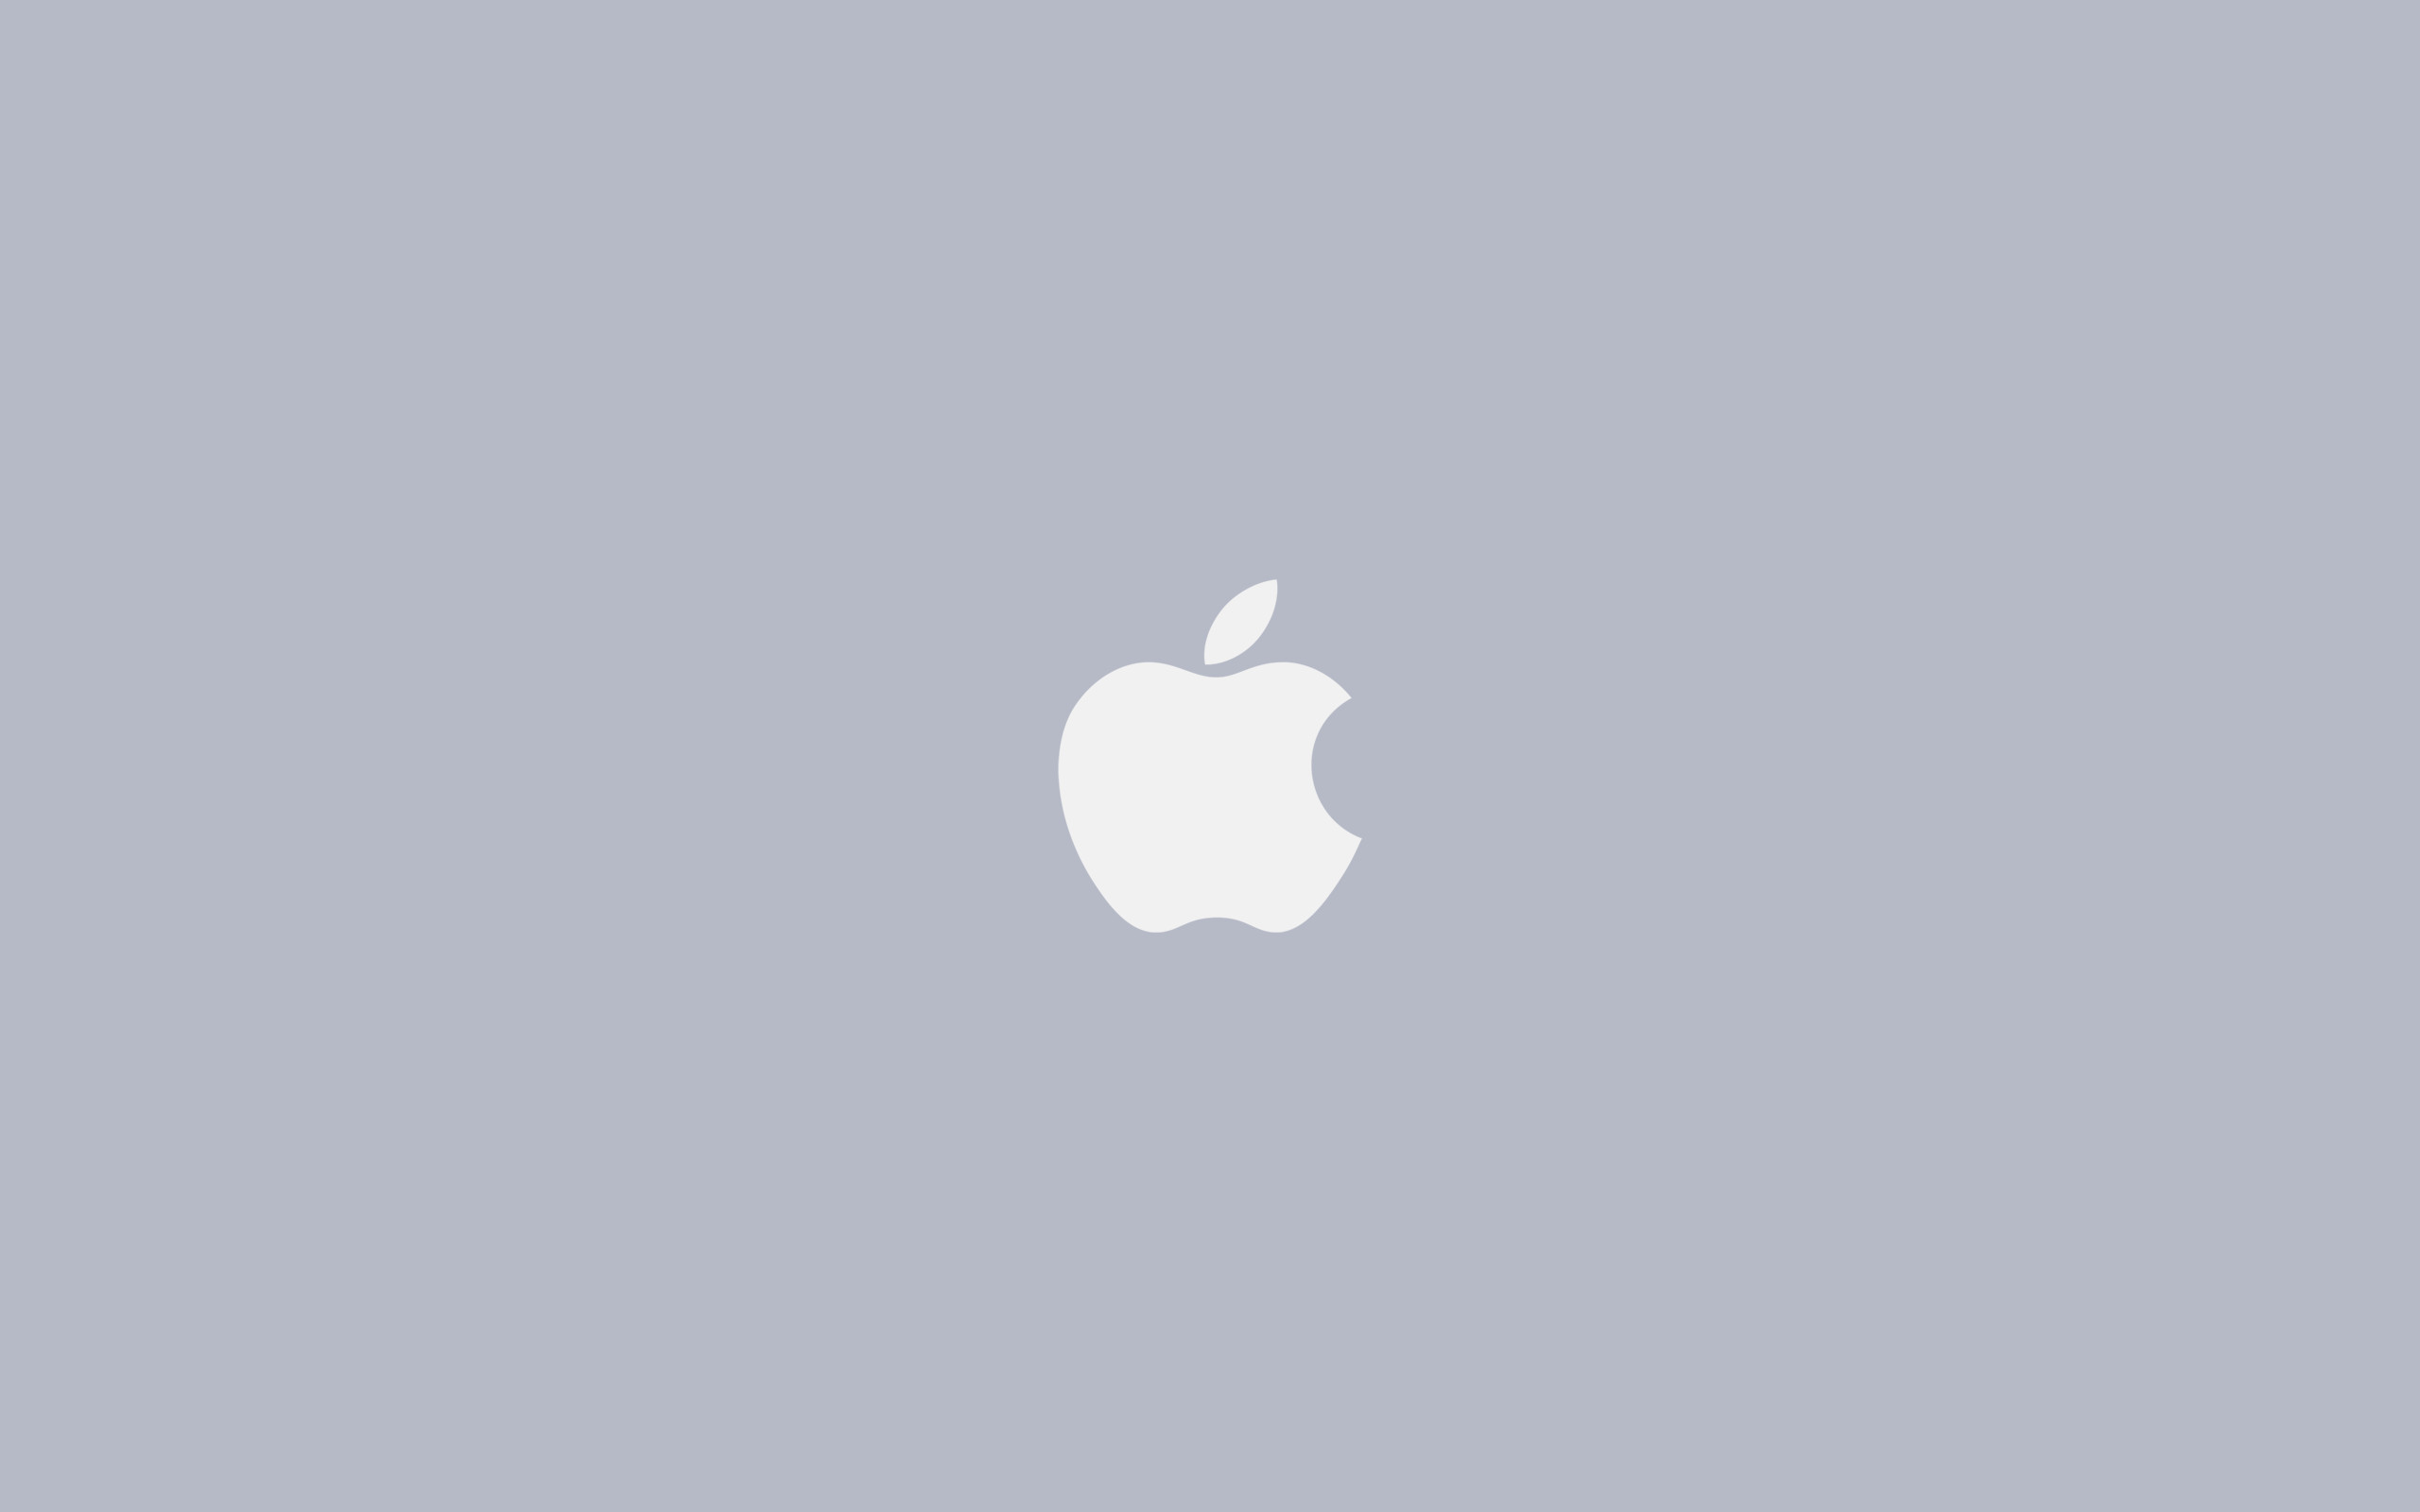 2560x1600 Silver Apple Logo Wallpaper Wallpapers) – Wallpapers and Backgrounds